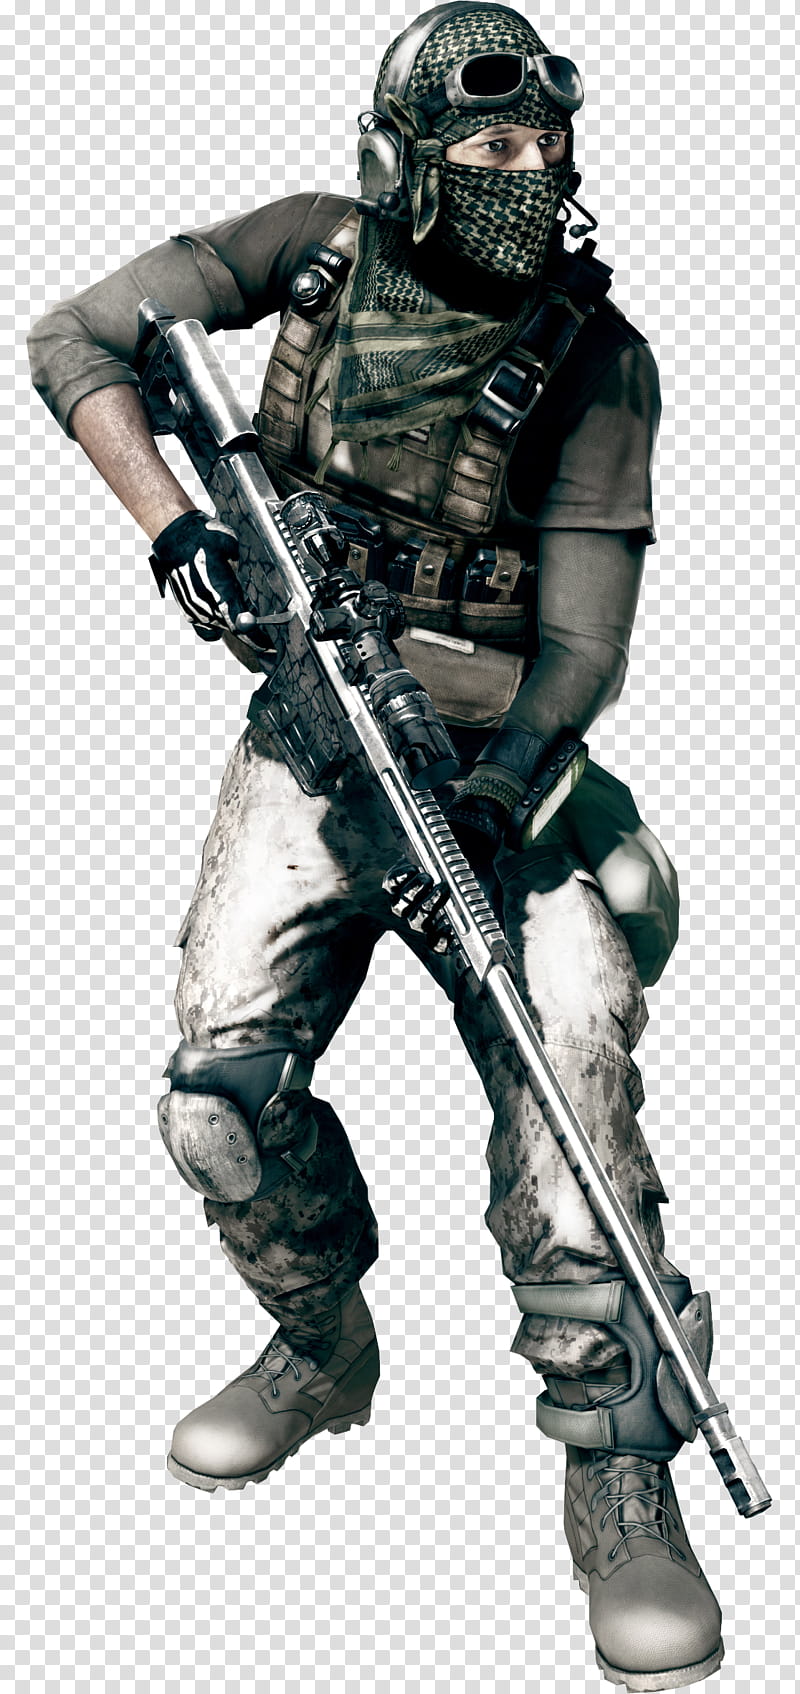 Battlefield  Soldiers rendered, CS:GO Terrorist holding rifle illustration transparent background PNG clipart